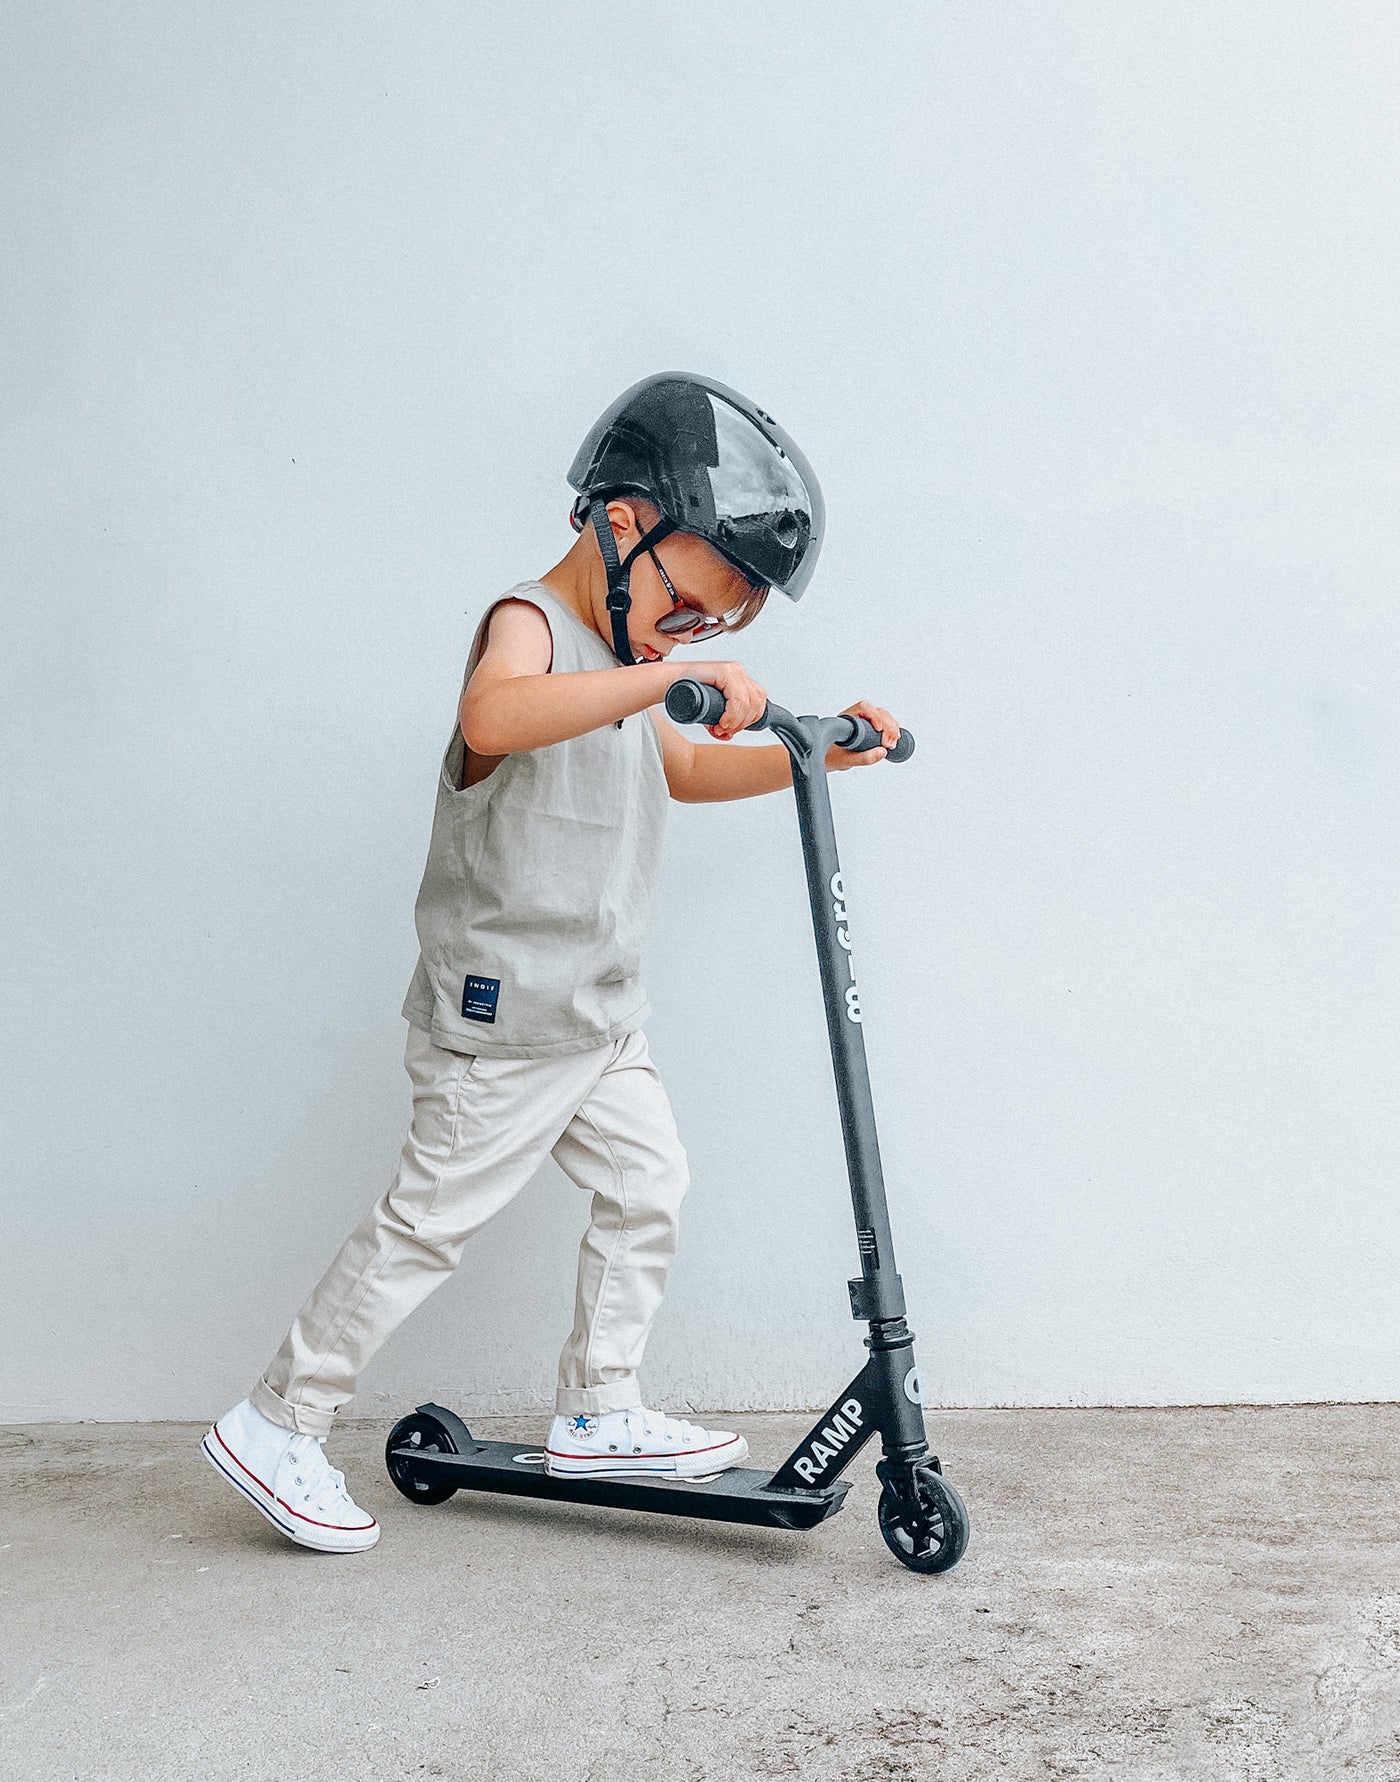 young boy riding a beginner black freestyle scooter